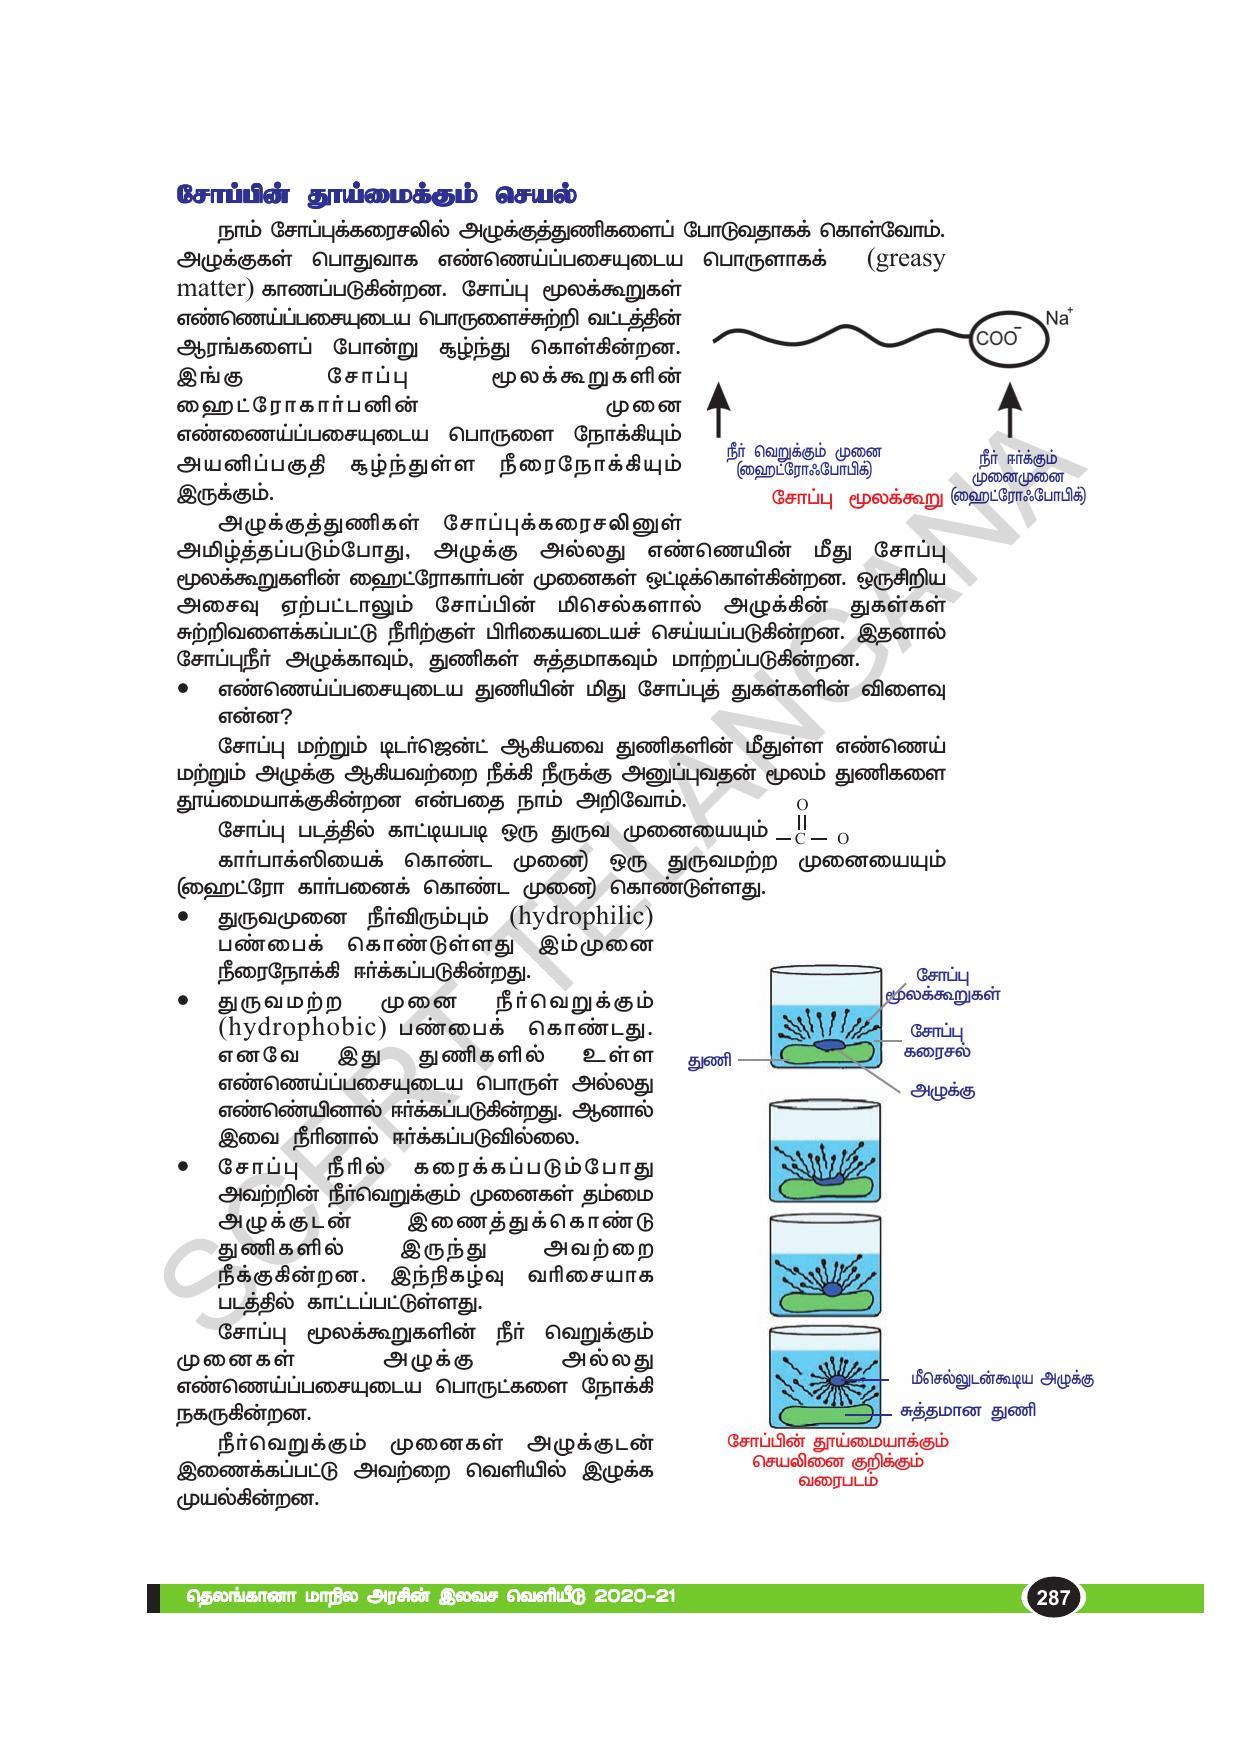 TS SCERT Class 10 Physical Science(Tamil Medium) Text Book - Page 299